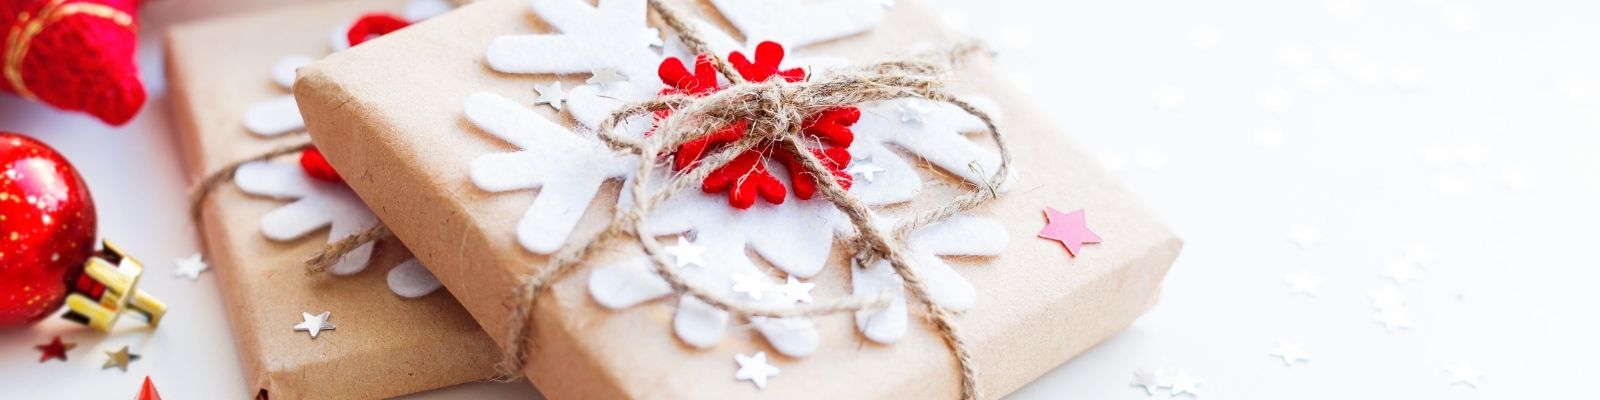 How to prepare your retail business for Christmas shoppers